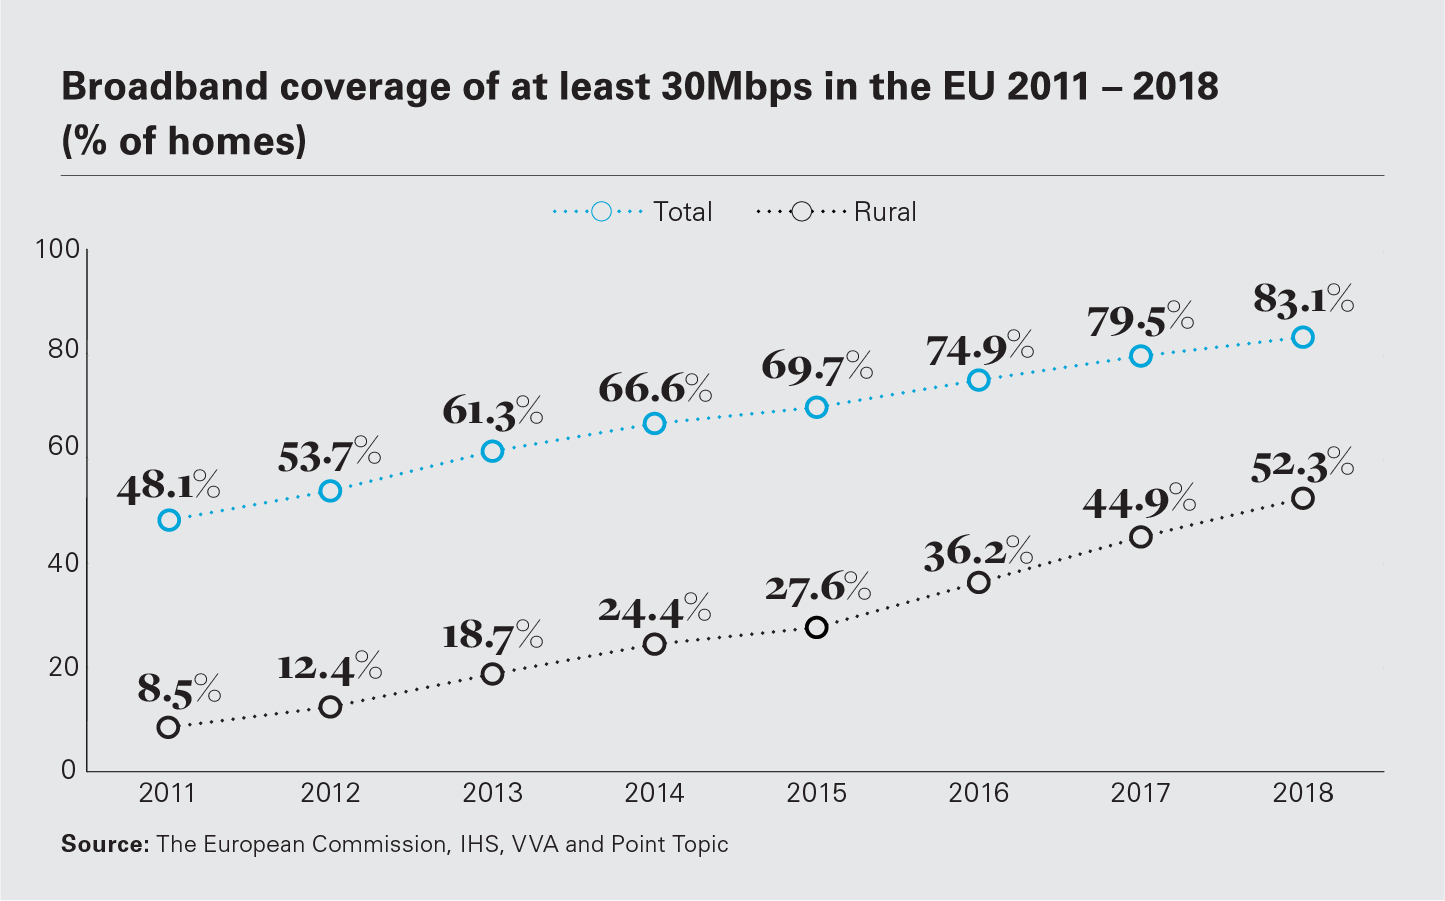 Broadband coverage of at least 30 Mbps in the EU 2011 – 2018 (% of homes)